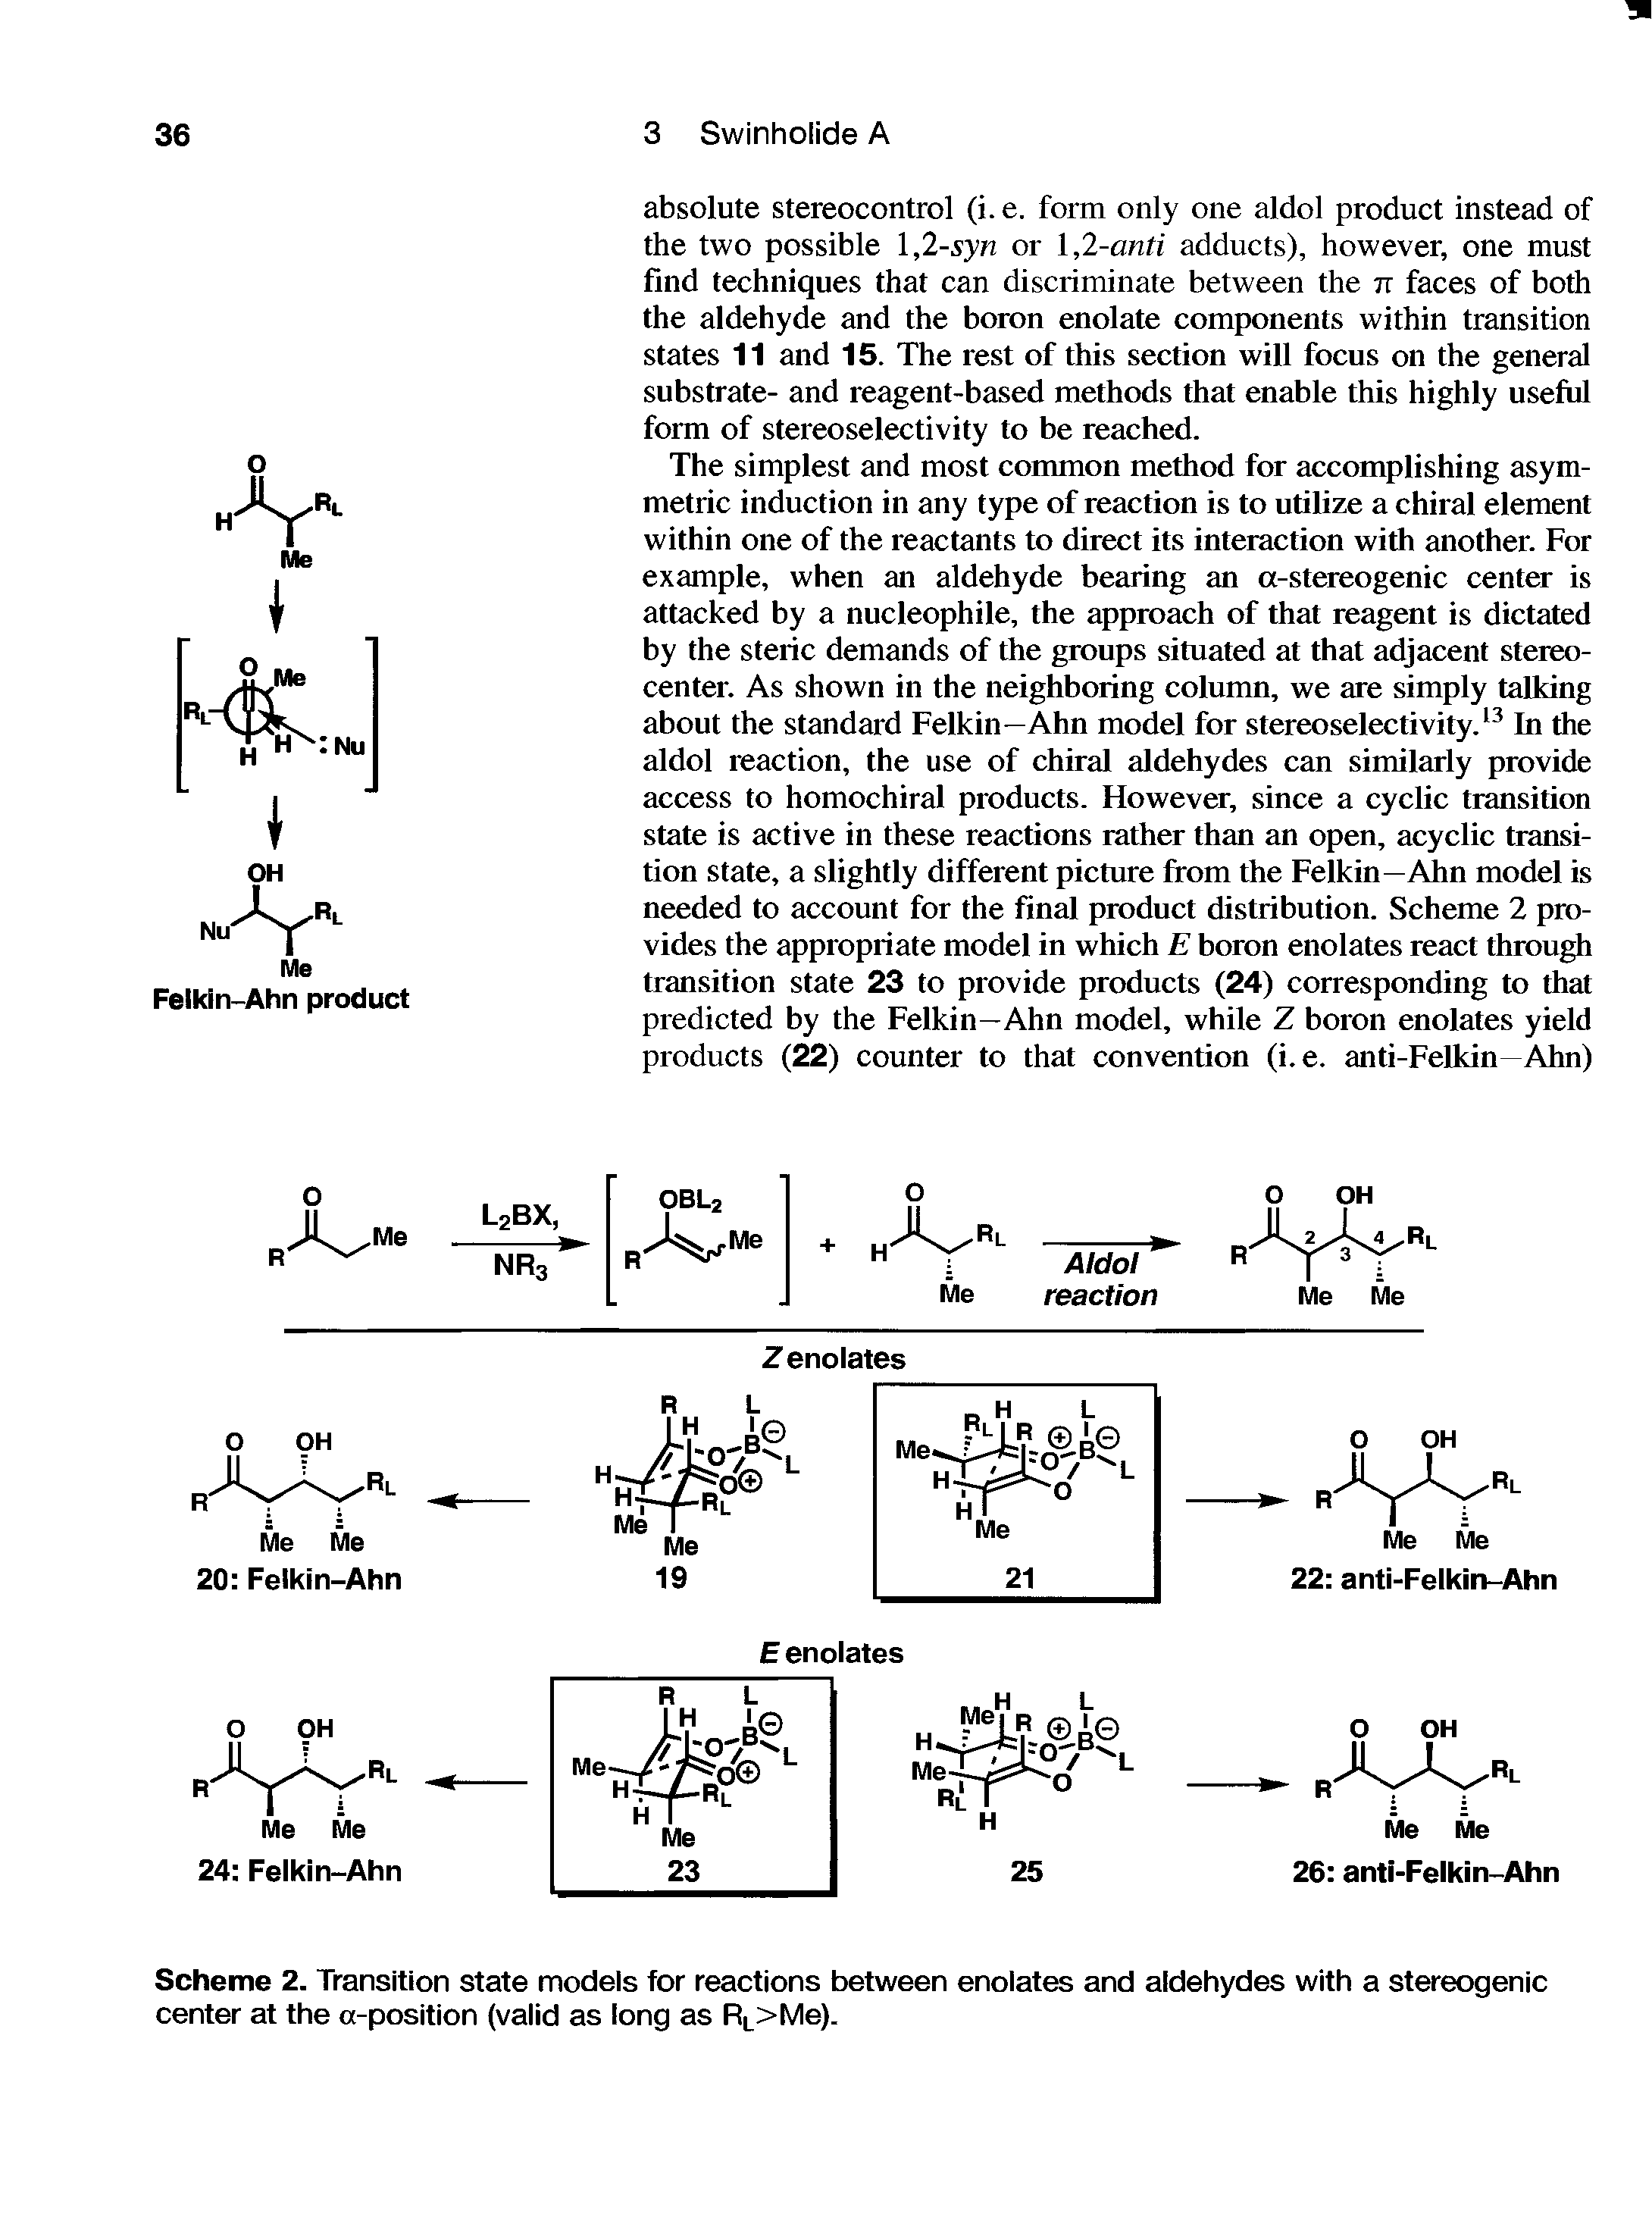 Scheme 2. Transition state models for reactions between enolates and aldehydes with a stereogenic center at the a-position (valid as long as RL>Me).